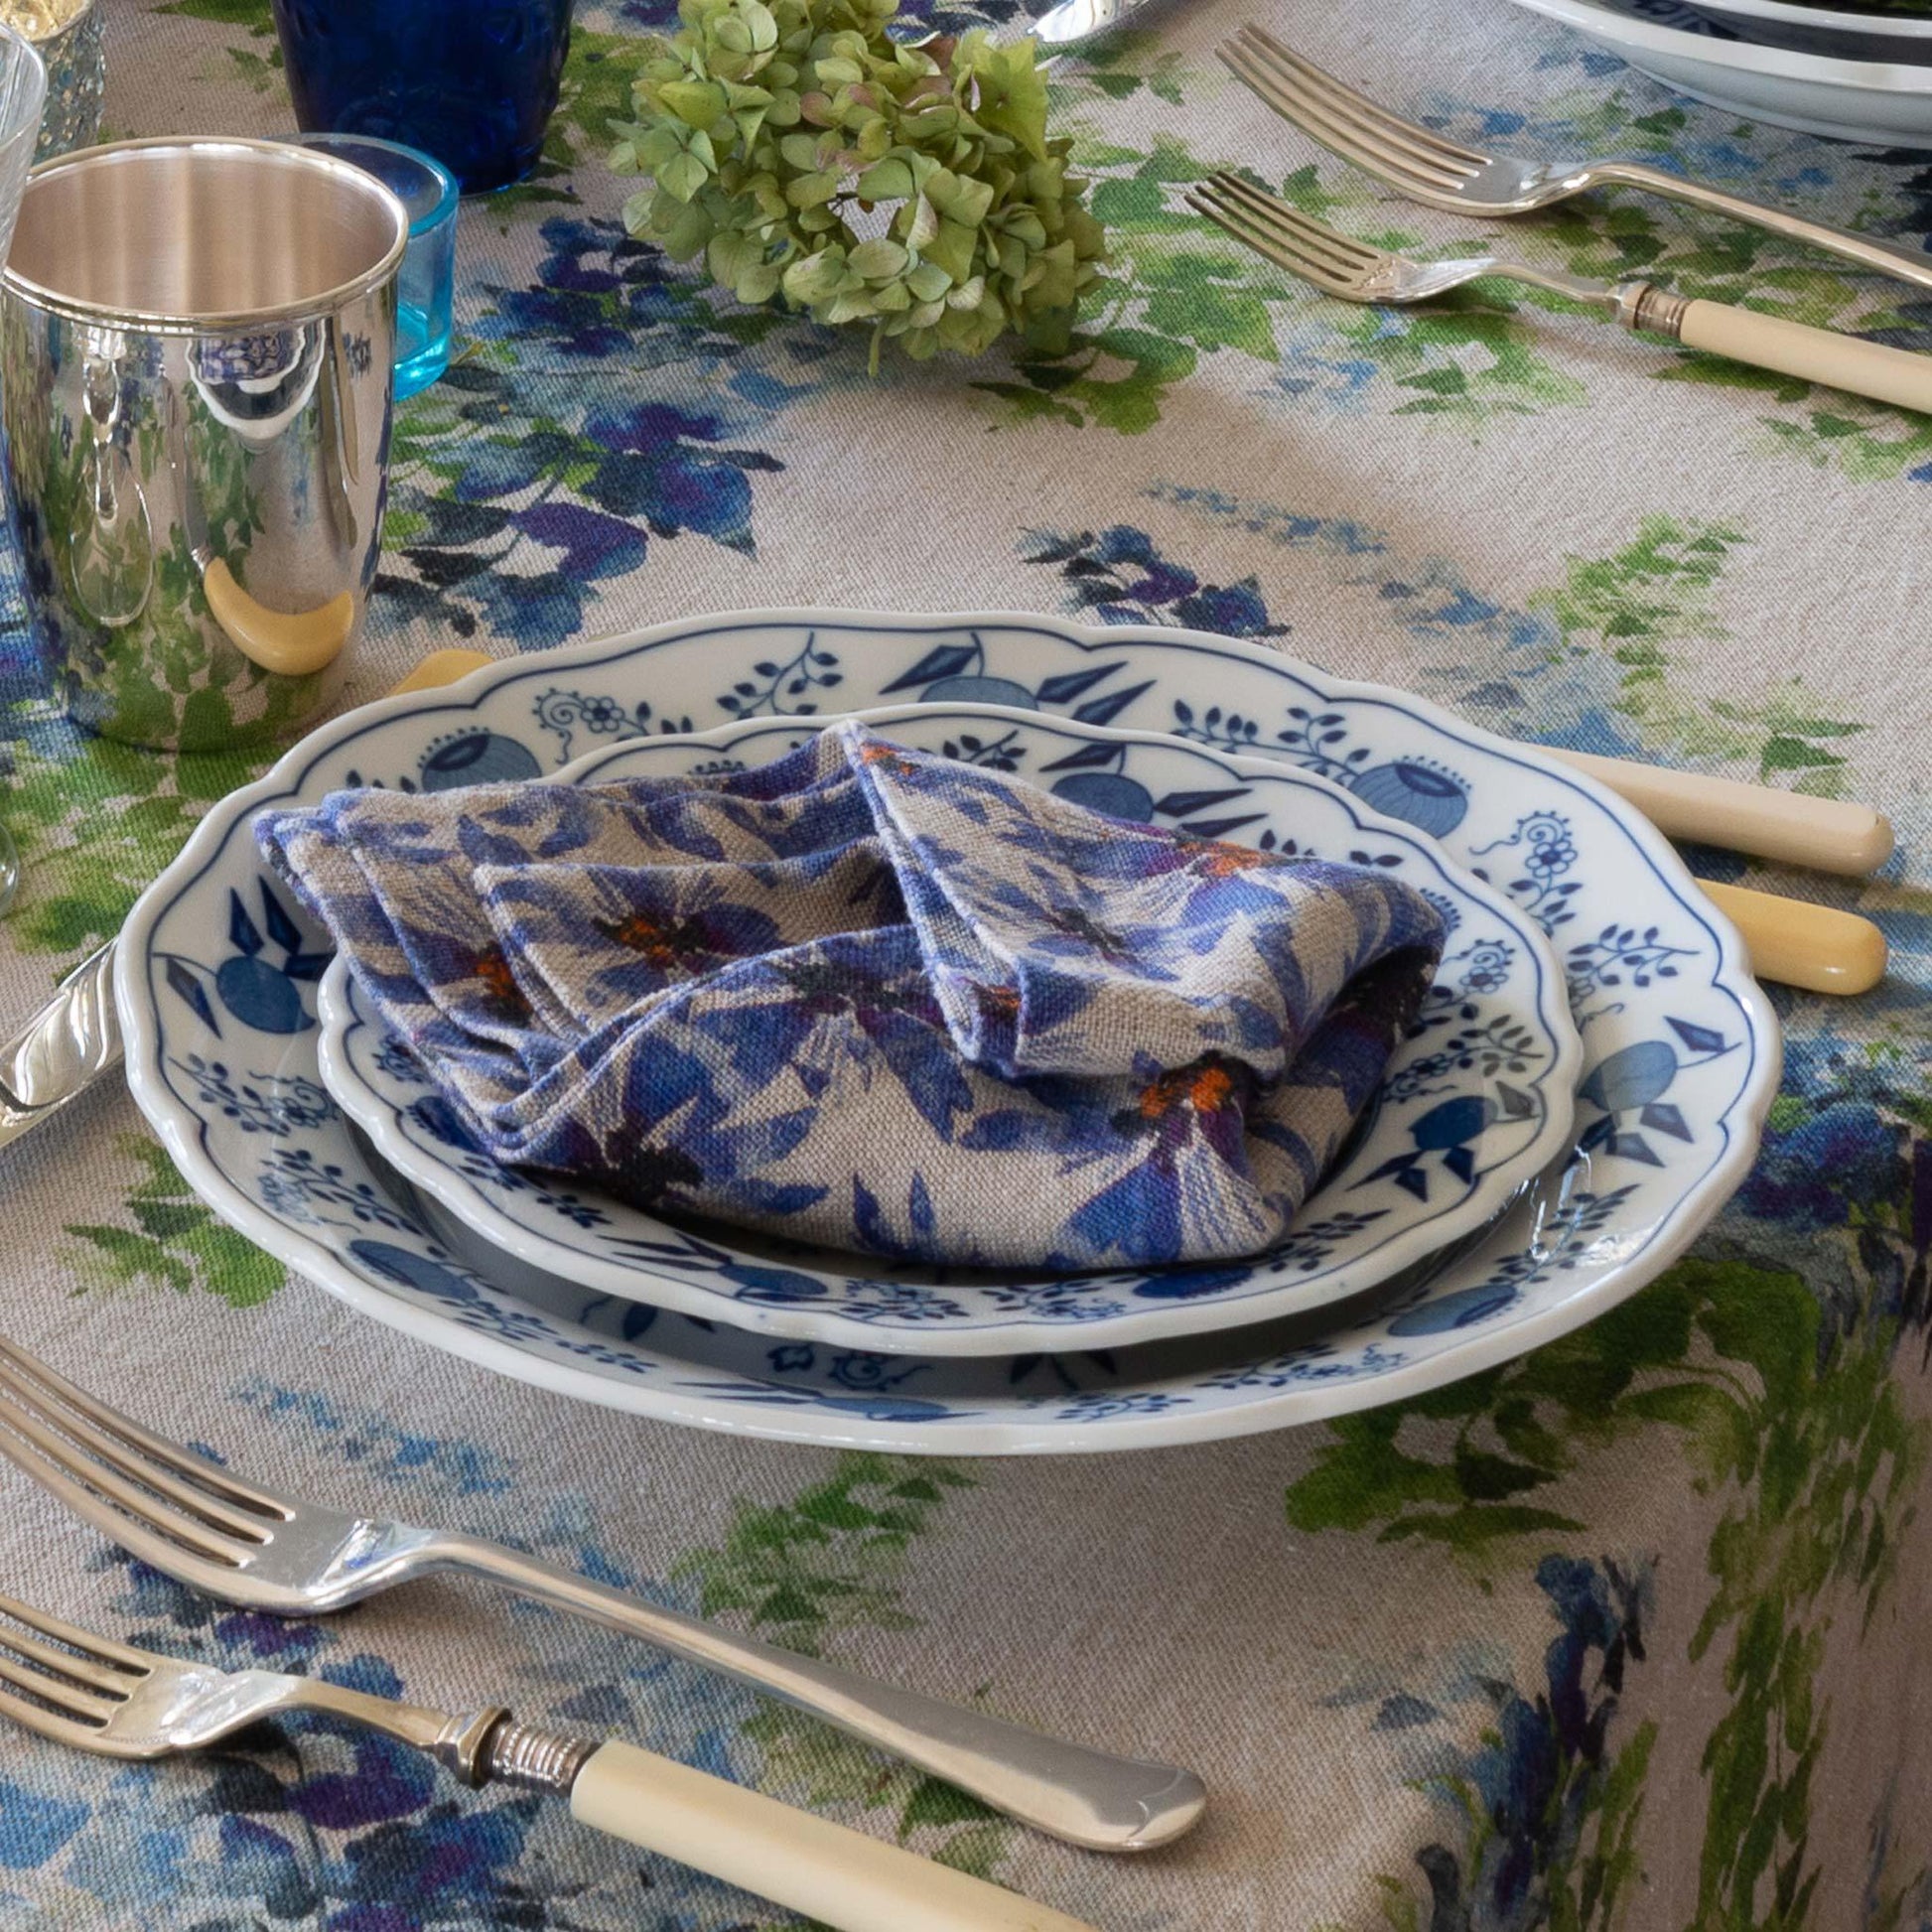 Table setting with blue and white linen napkin.